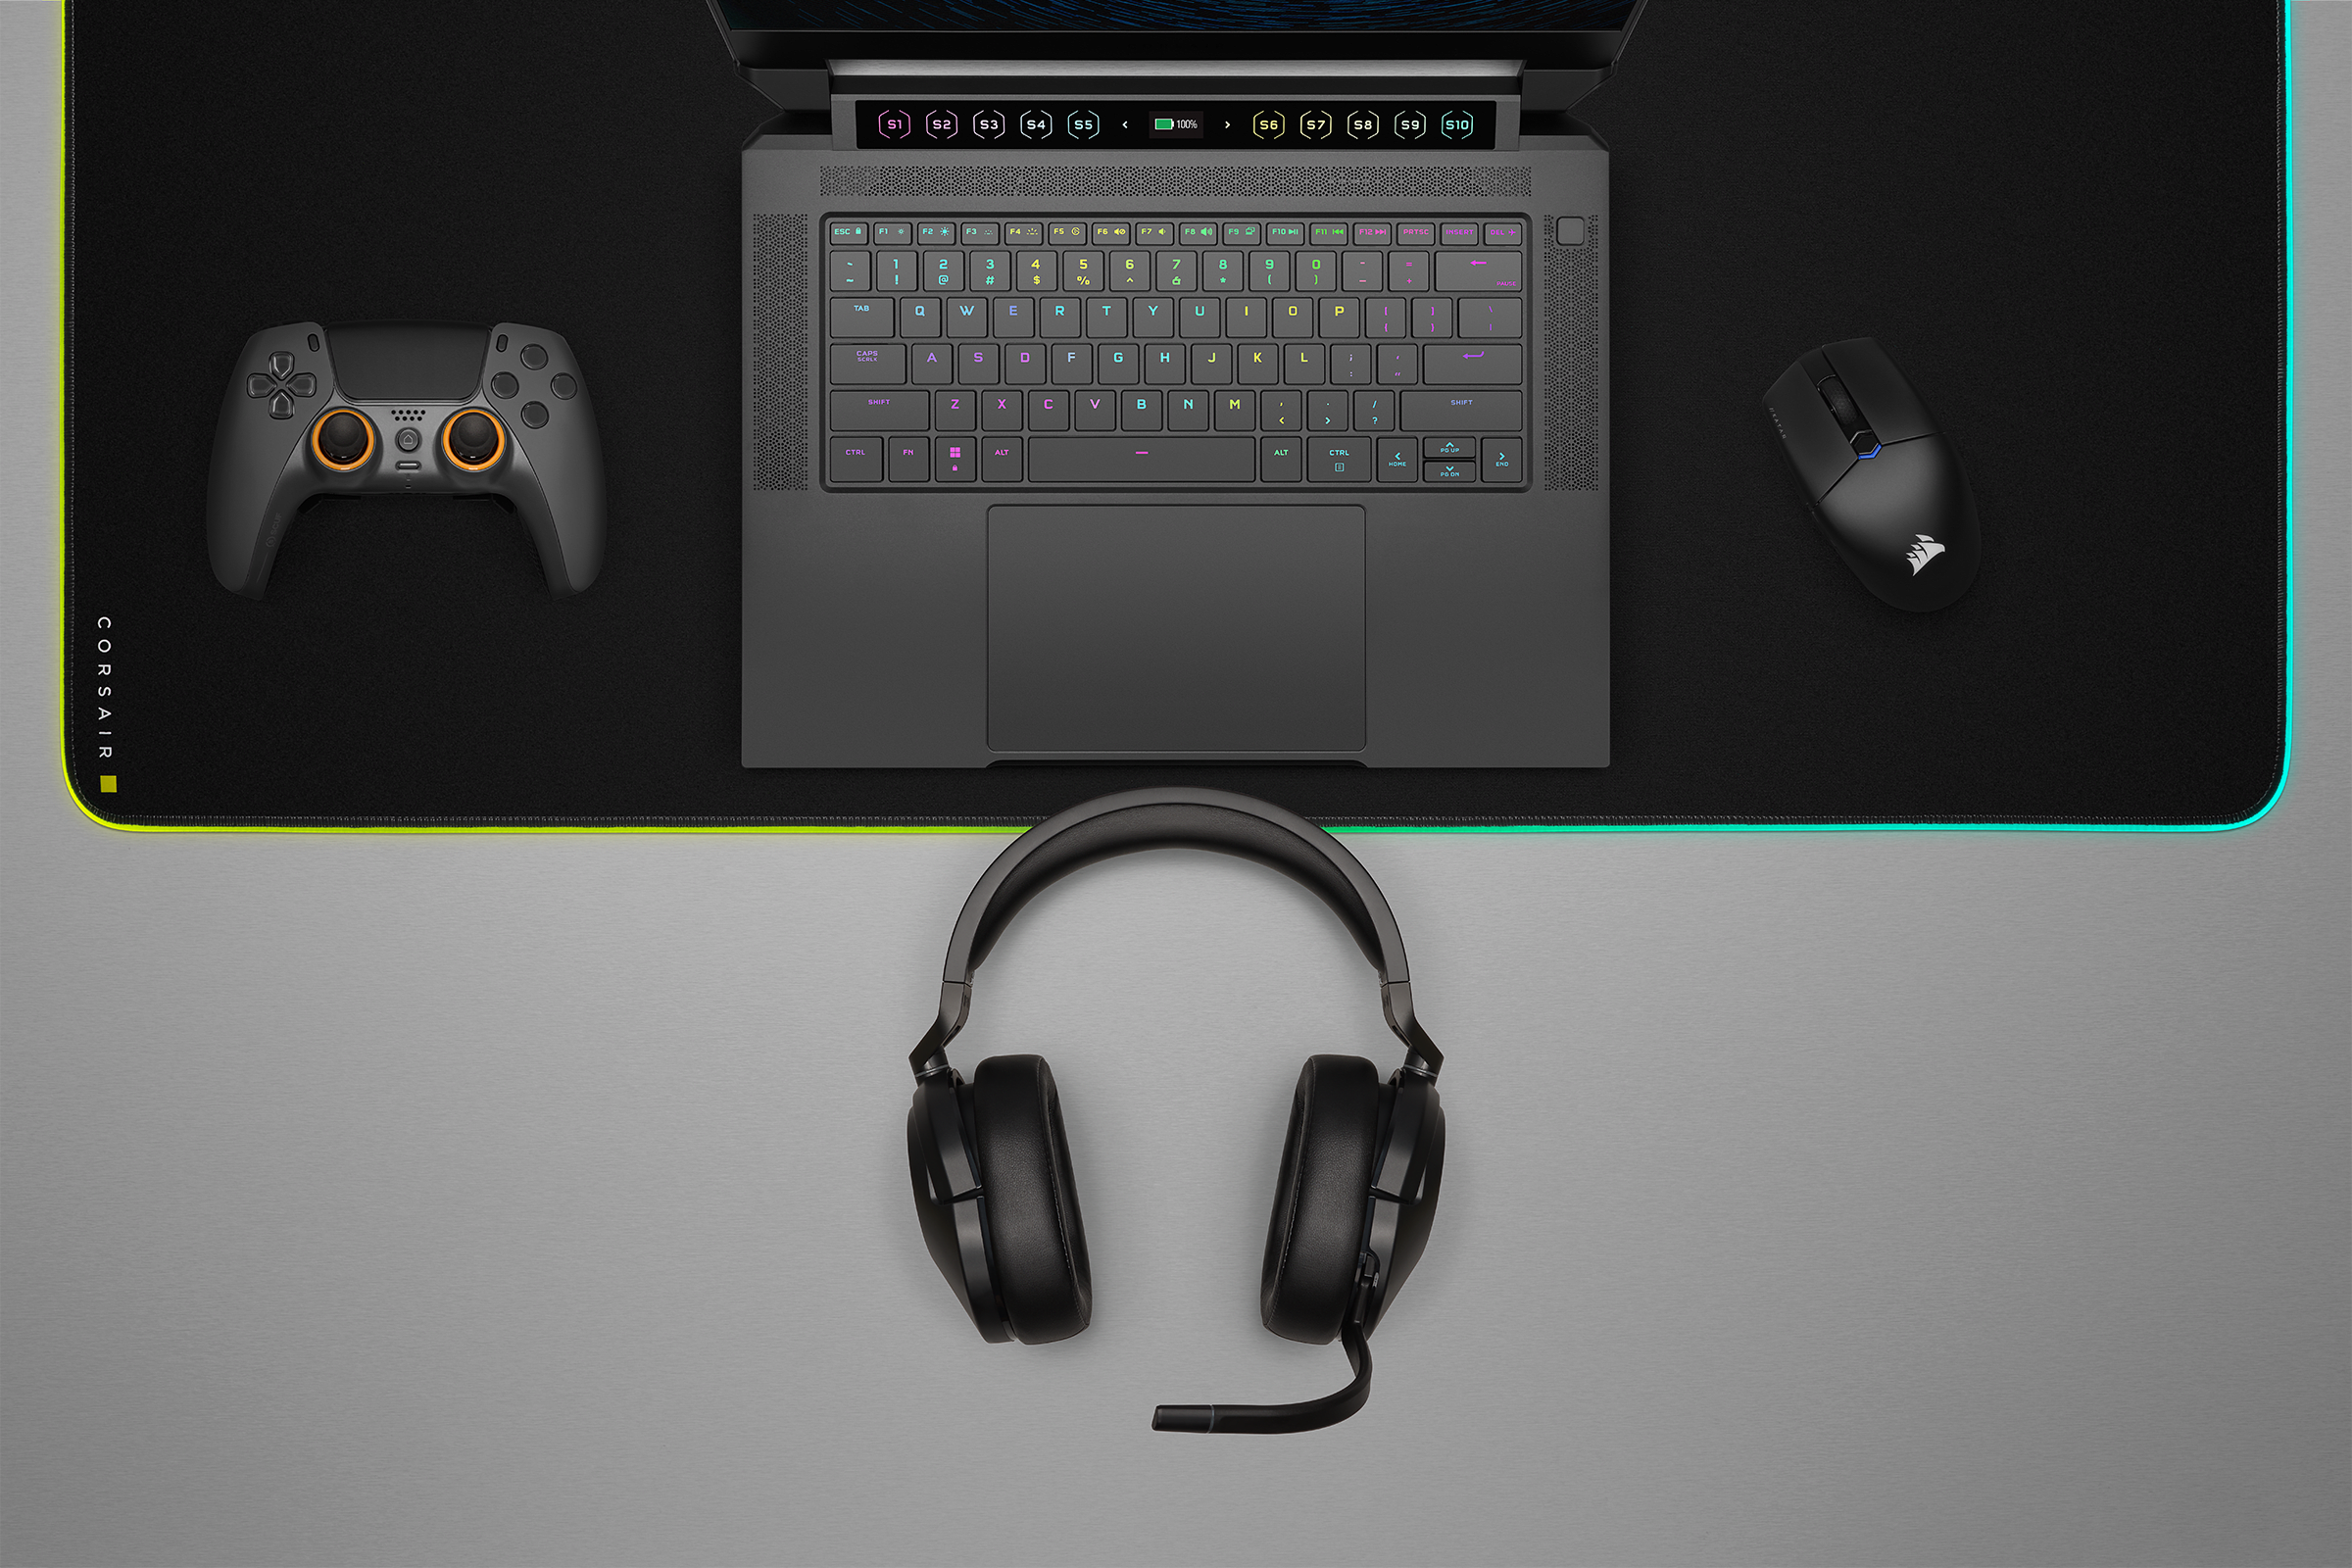 HS55 WIRELESS CORE Gaming Headset